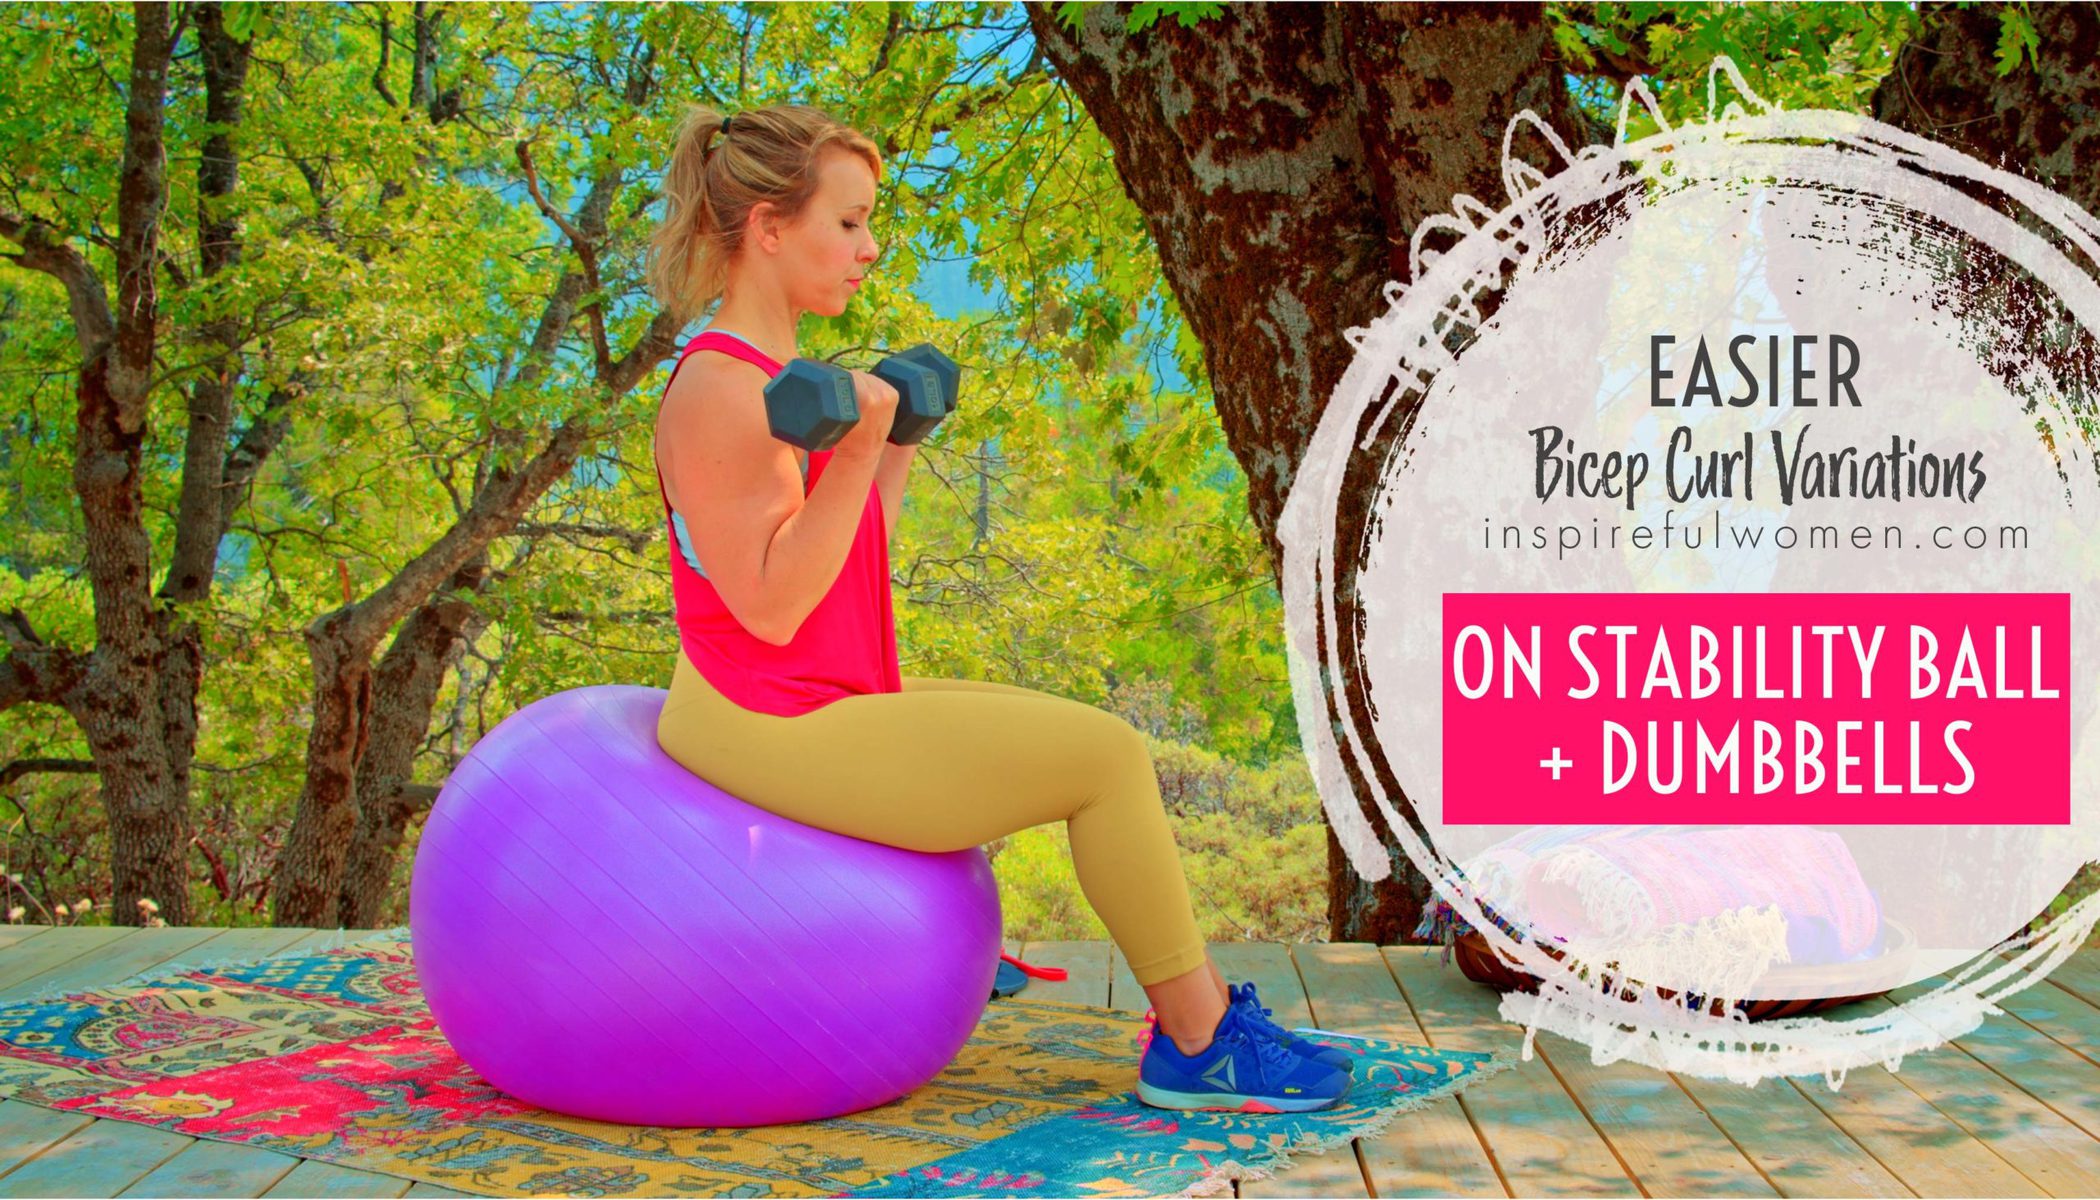 on-stability-ball-and-dumbbells-easier-bicep-curl-variation